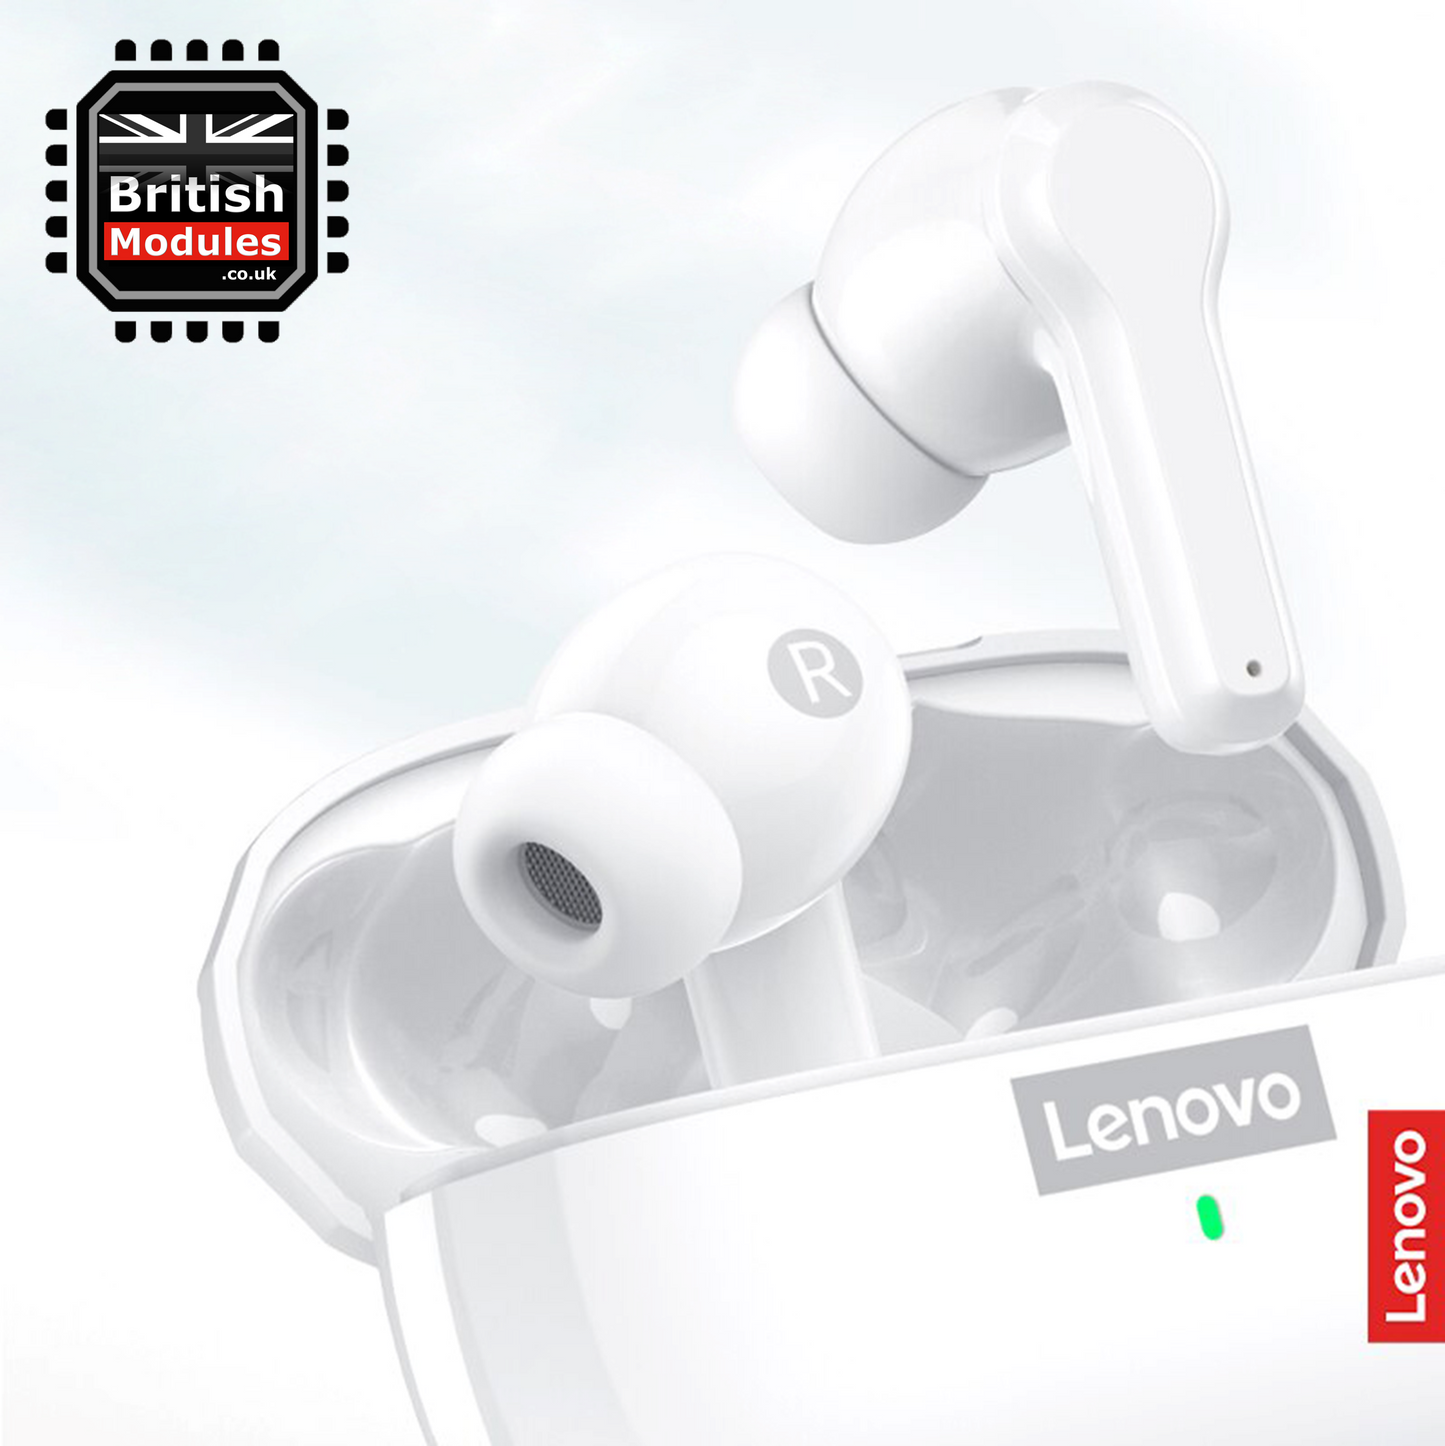 Lenovo LP1s Pro Wireless Earbuds 5.0 TWS HIFI Stereo Noise Cancellation Headset Bluetooth Earphone for Apple iPhone, Android, Samsung